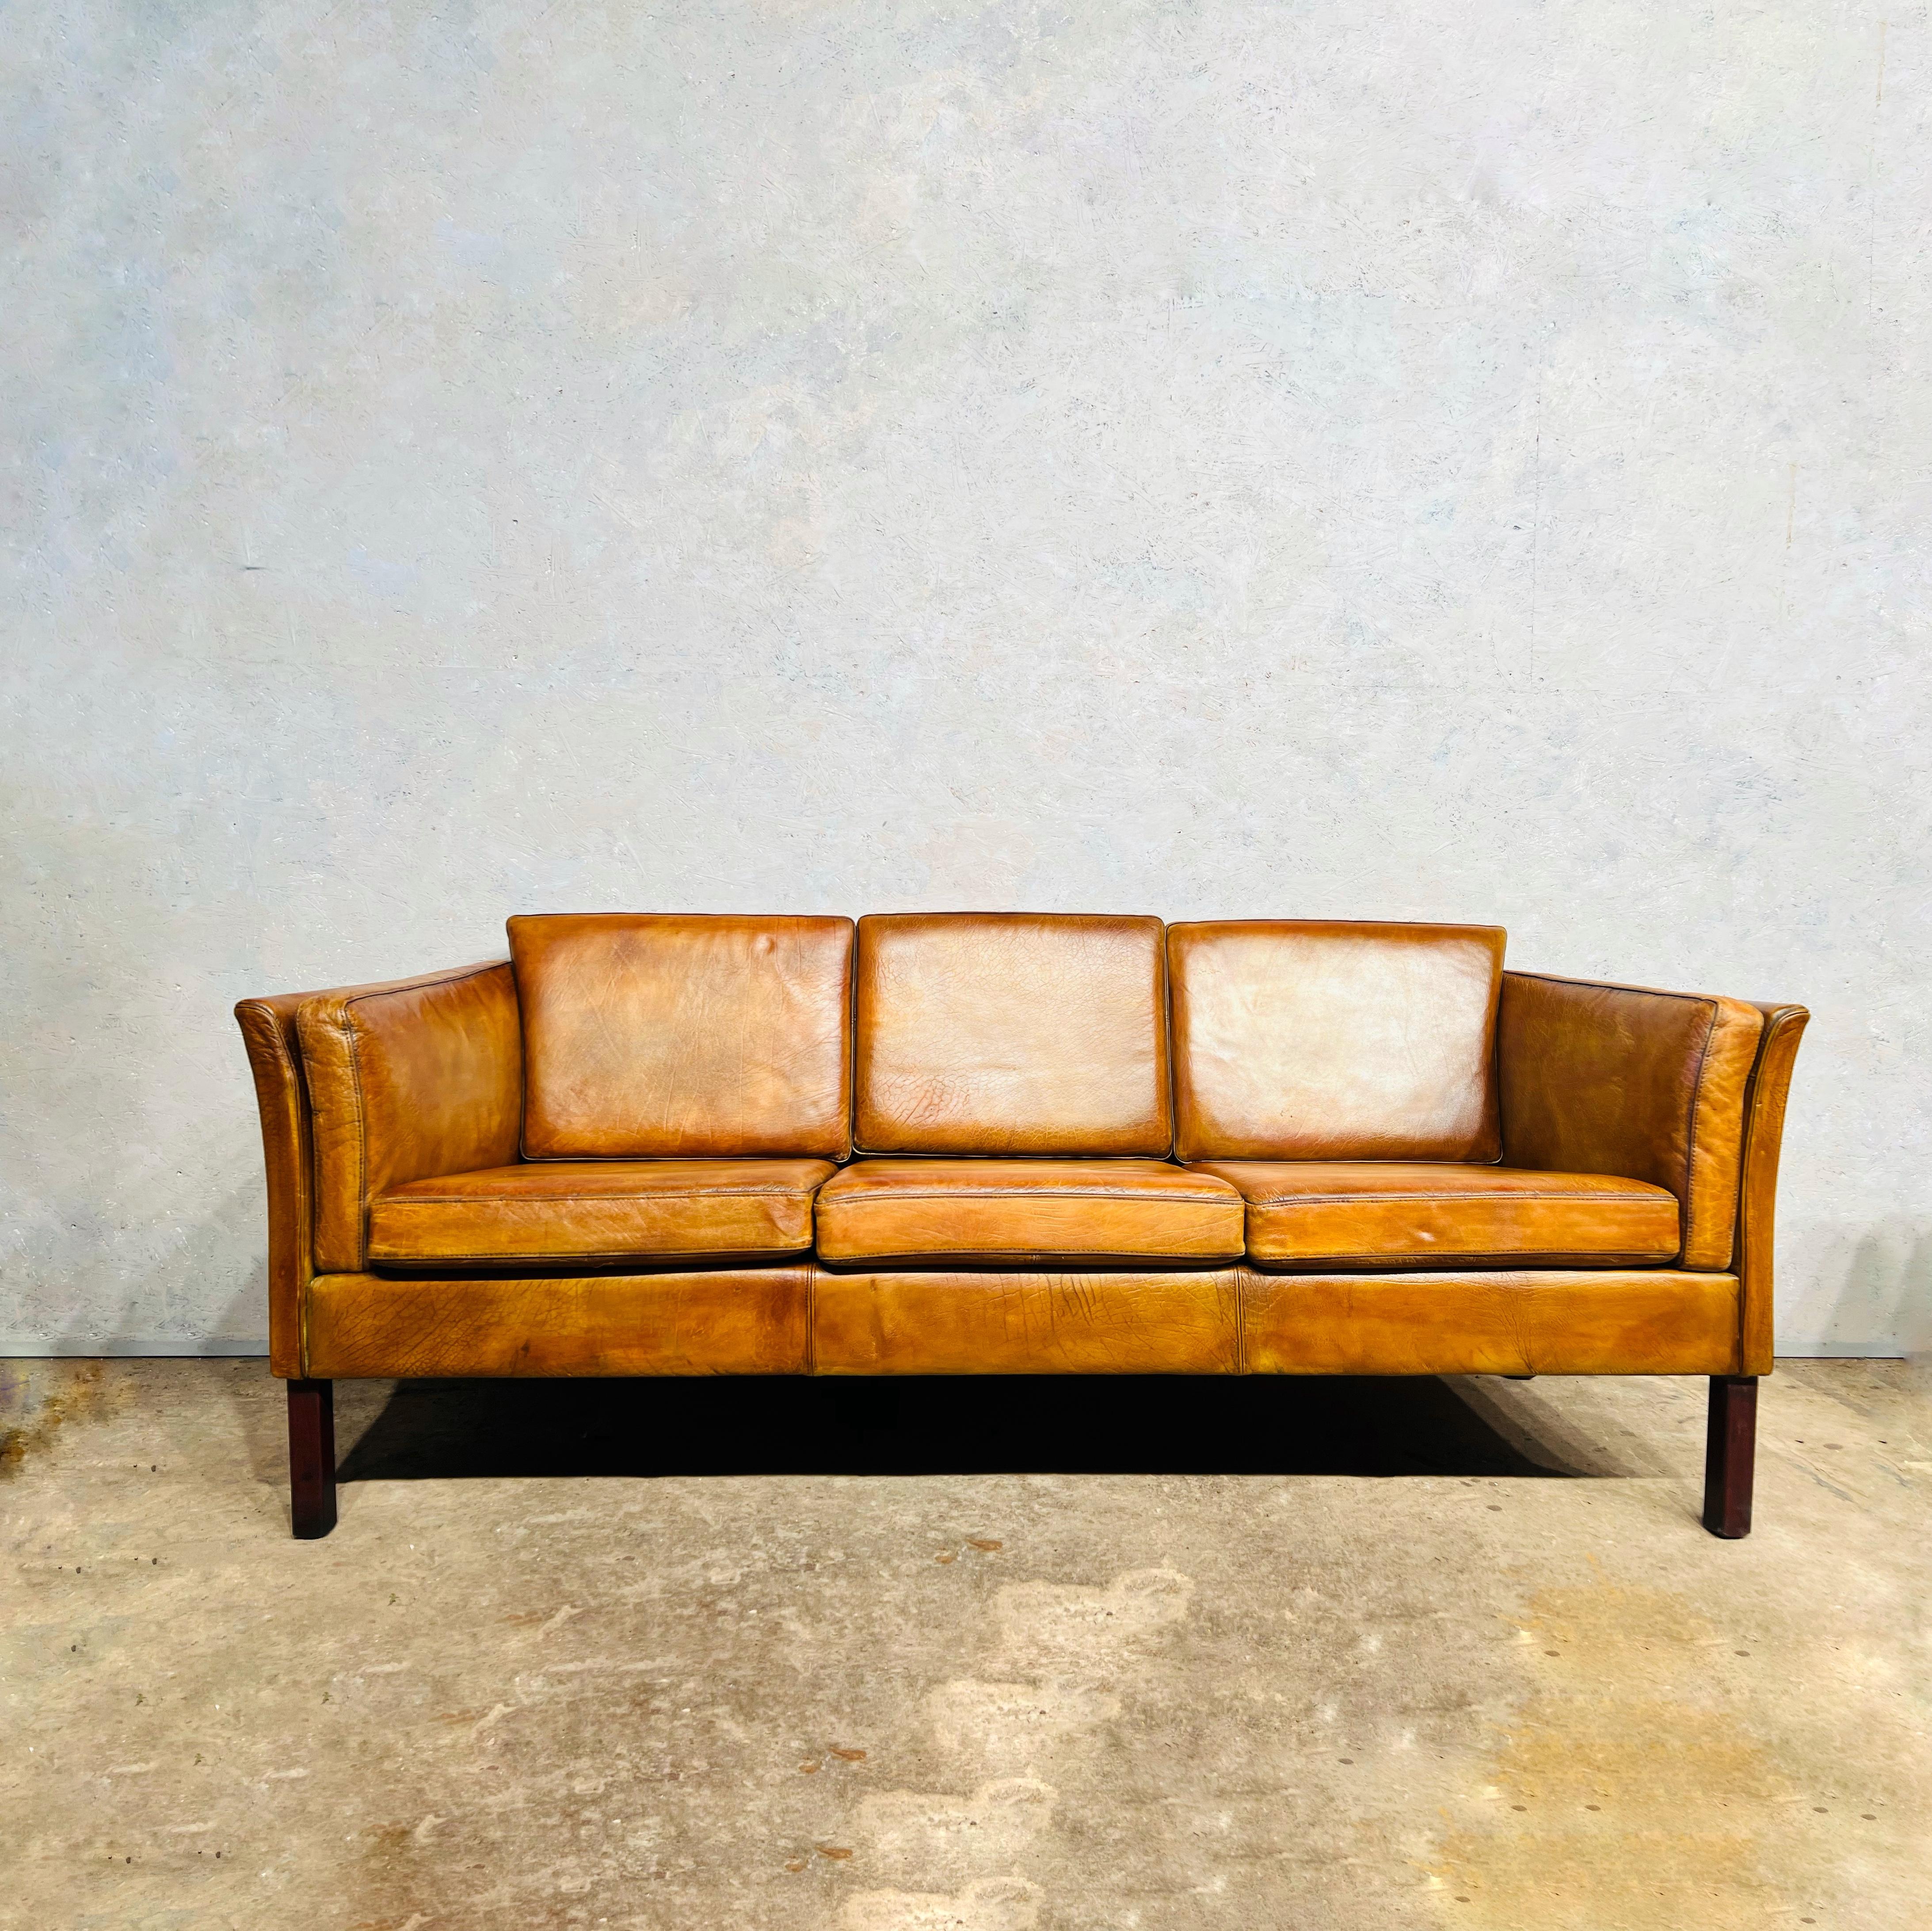 A Stylish 1970s sofa, great design with beautiful lines, sits wonderfully.

The leather is a Stunning hand dyed light tan color and has a great patina and finish.


